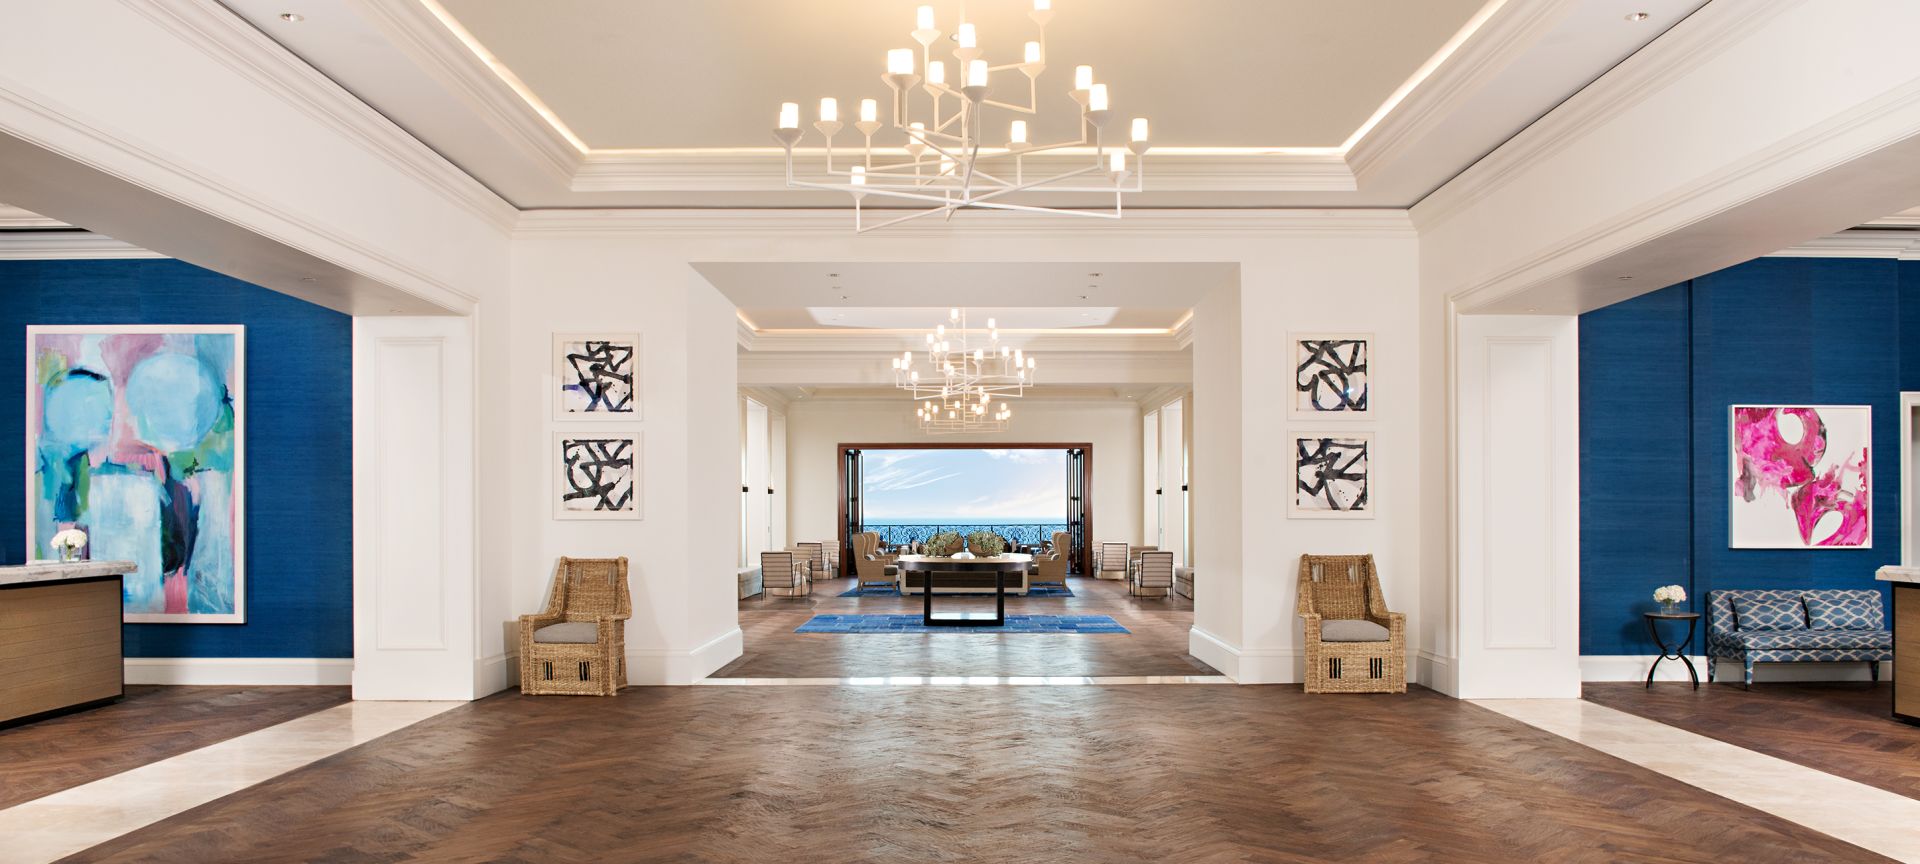 Reception area and lobby of the Waldorf Astoria Monarch Beach